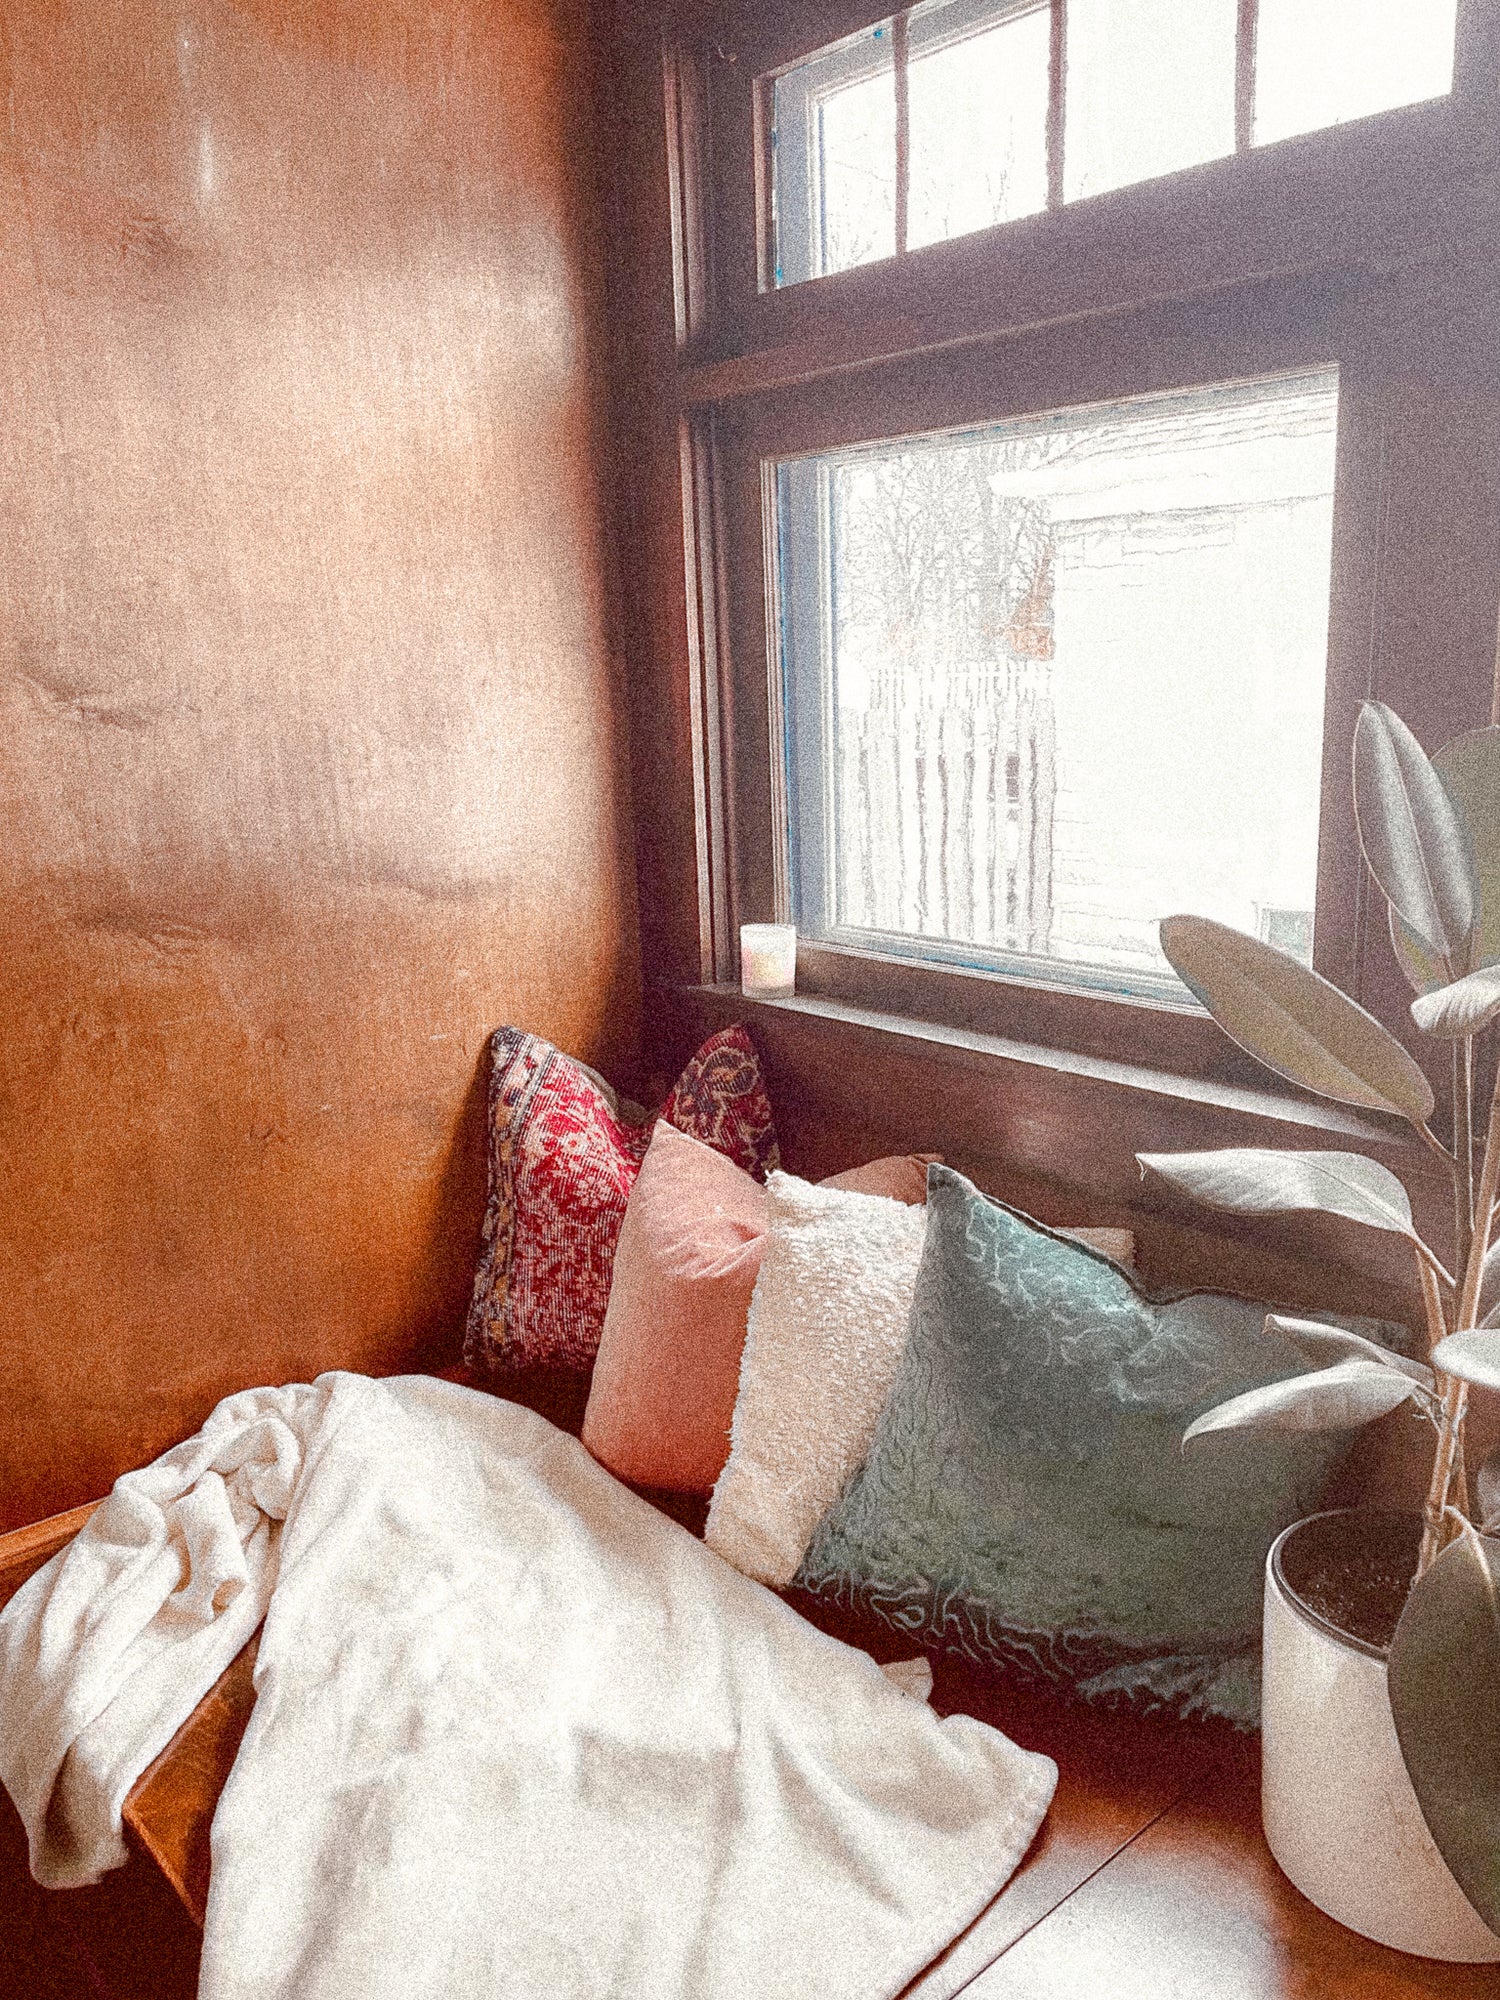 reading nook with wood panelling walls near a window with plants and pillows